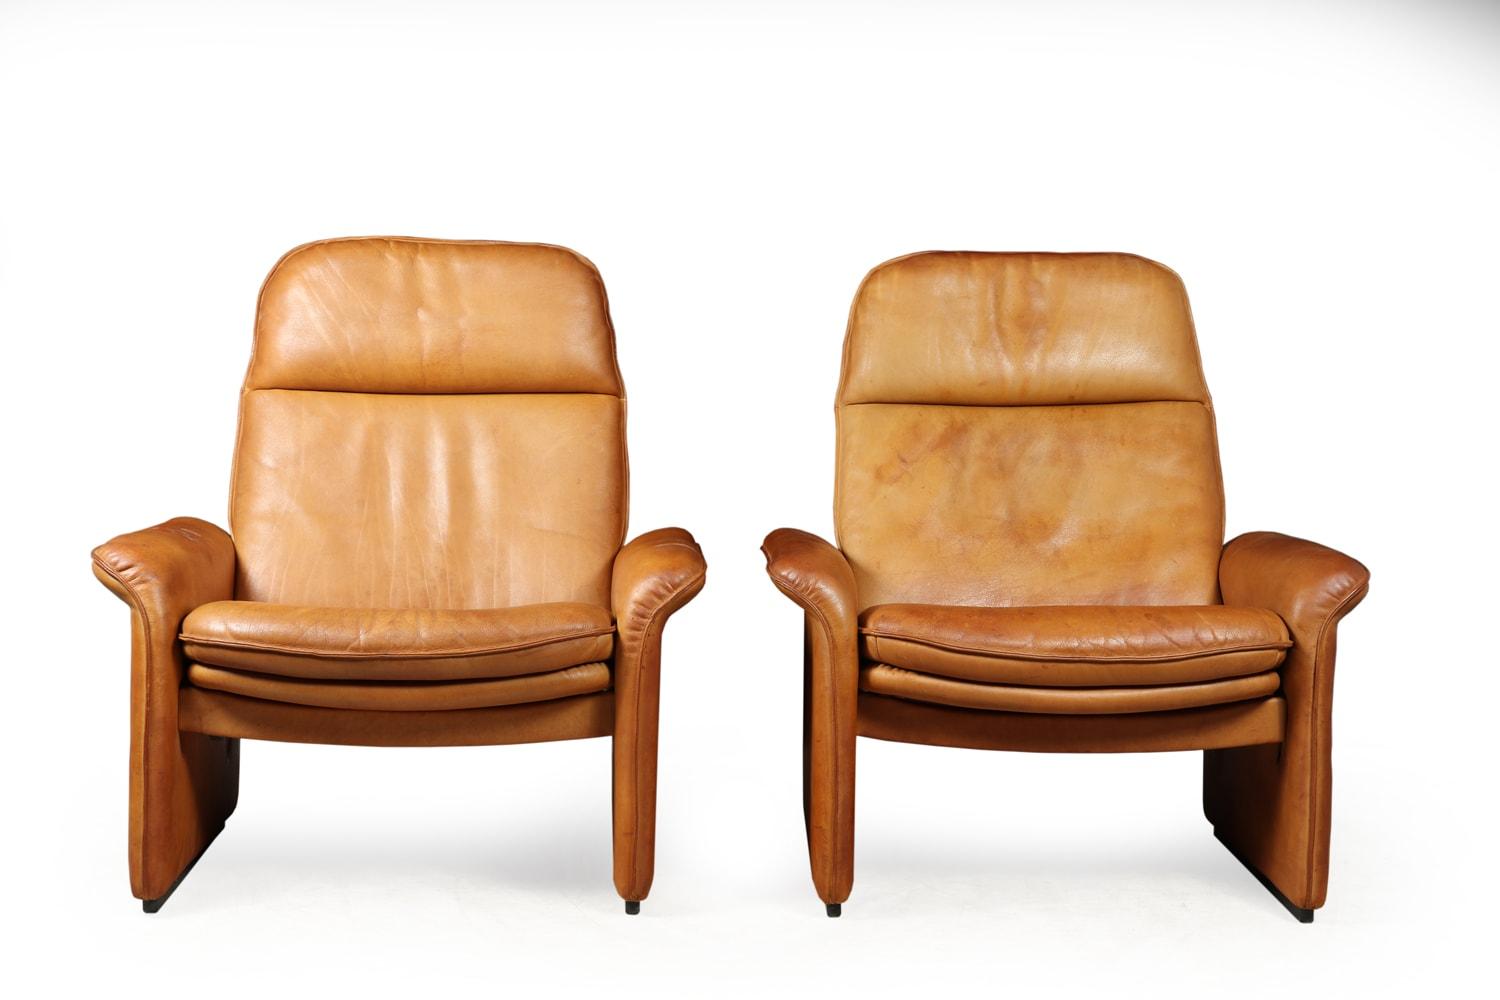 A Pair of De Sede reclining DS50 in tan neck leather

A pair of relining chairs from the exclusive range of De Sede. Produced in the Switzerland in the 1960’s these chairs remain in great original condition. They have a thick neck leather in a tan